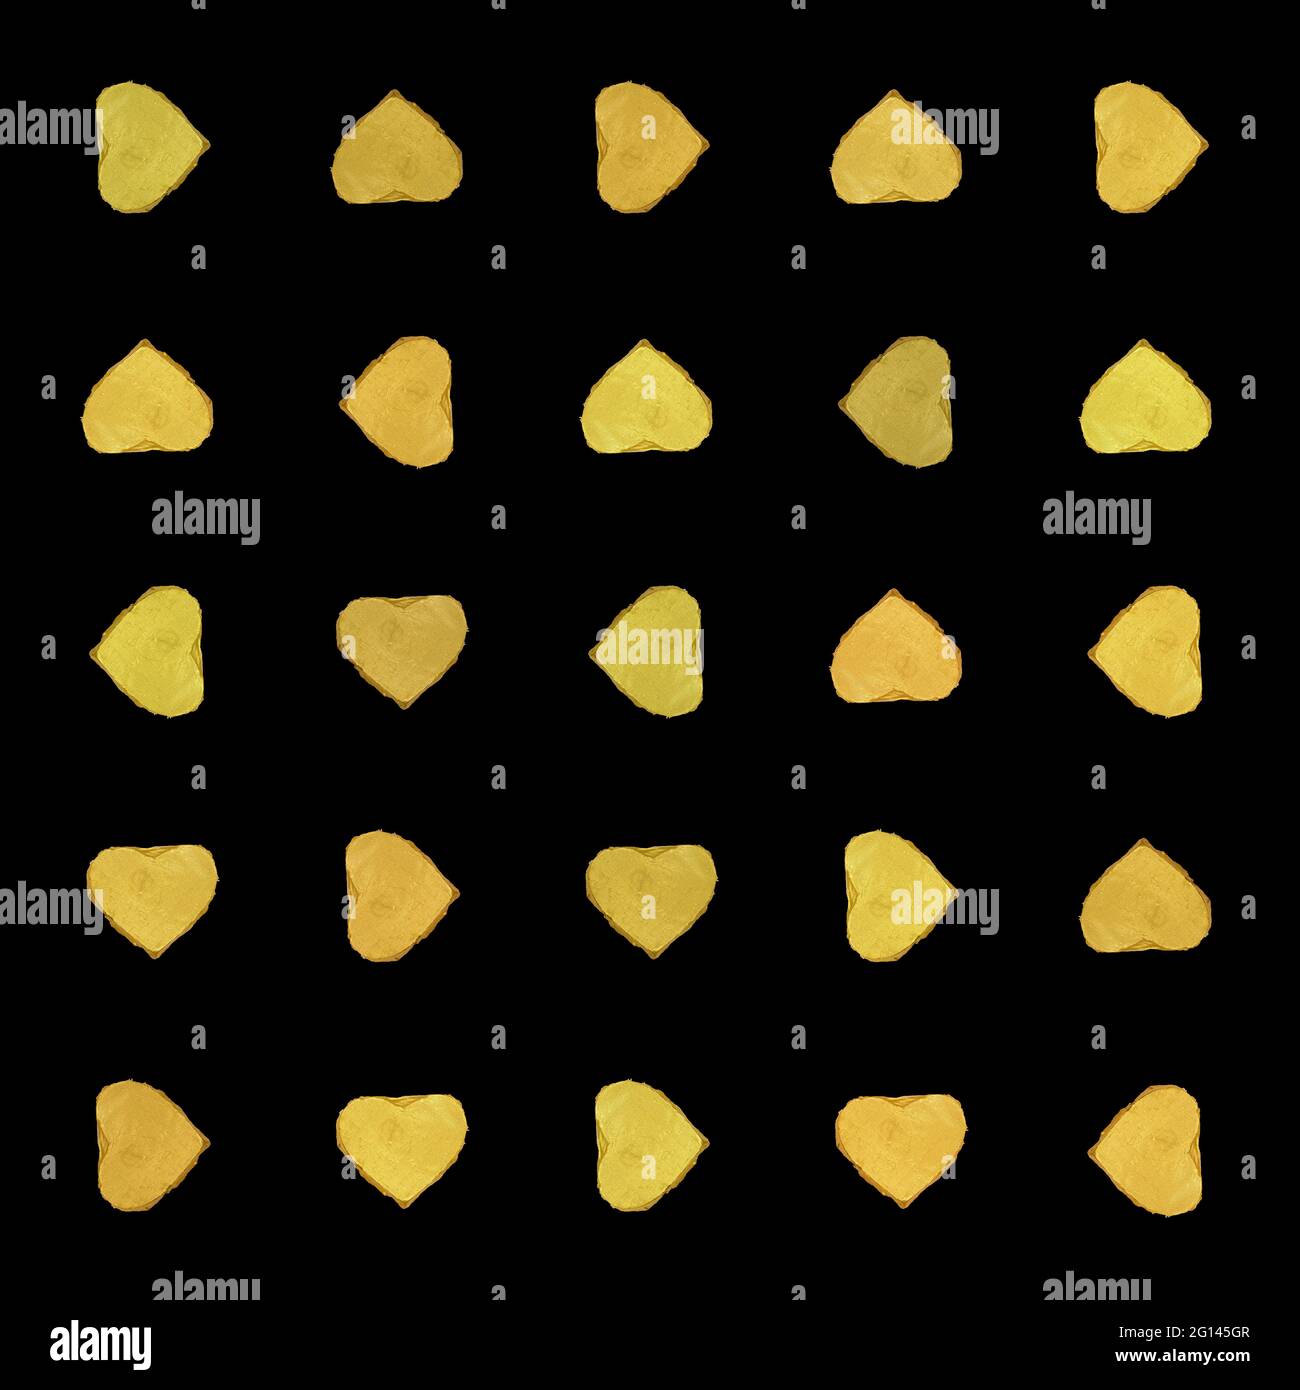 seamless pattern of yellow hearts, black background with chocolate in a yellow  Stock Photo